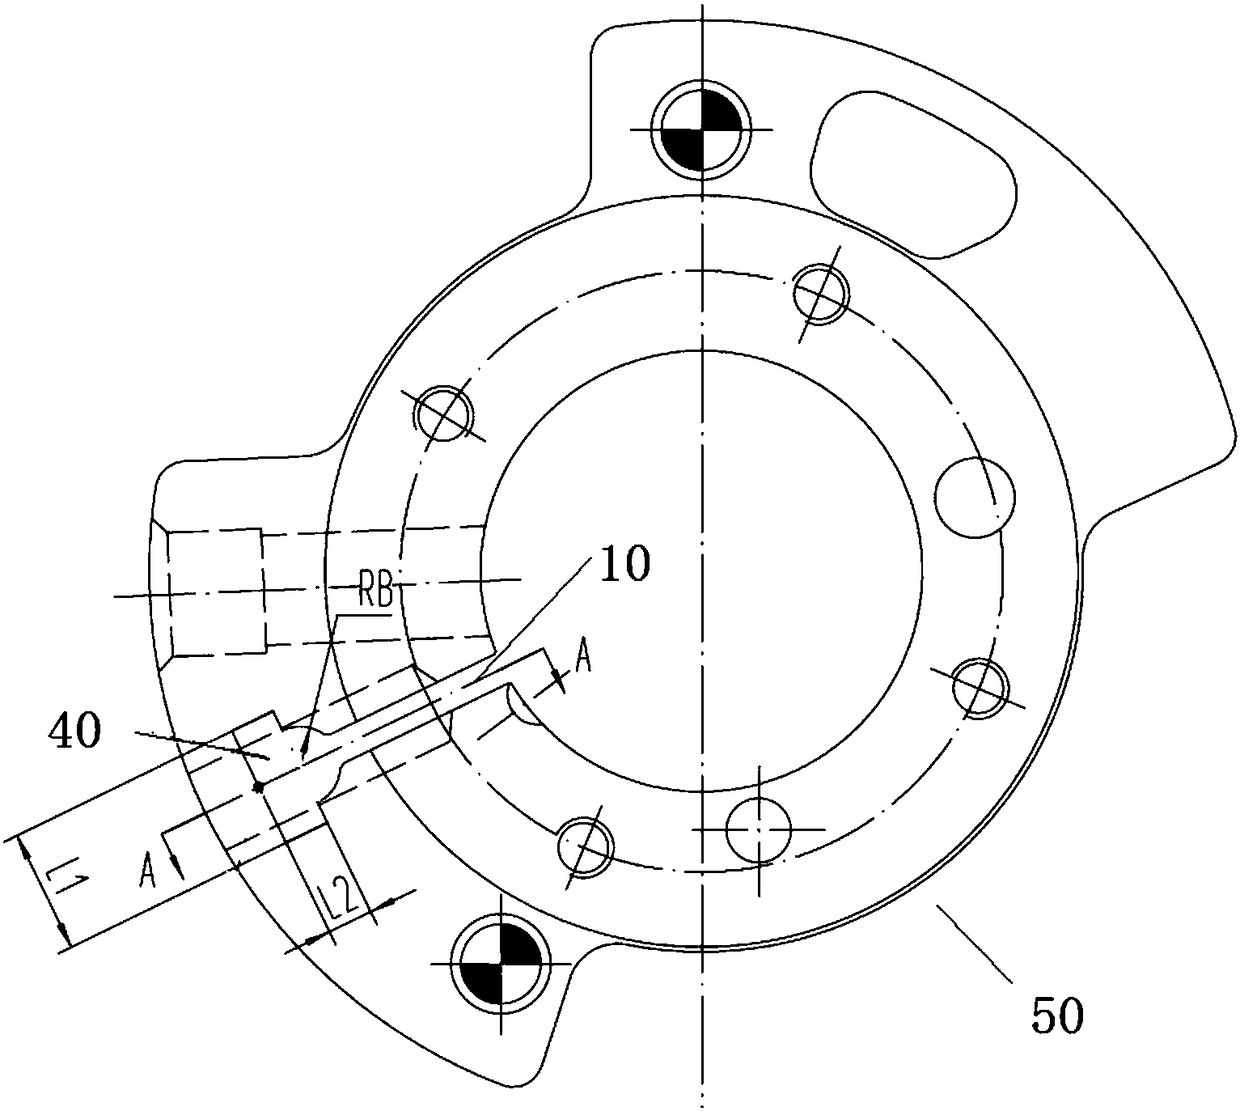 Spring fixing structure of rolling rotor compressor and rolling rotor compressor